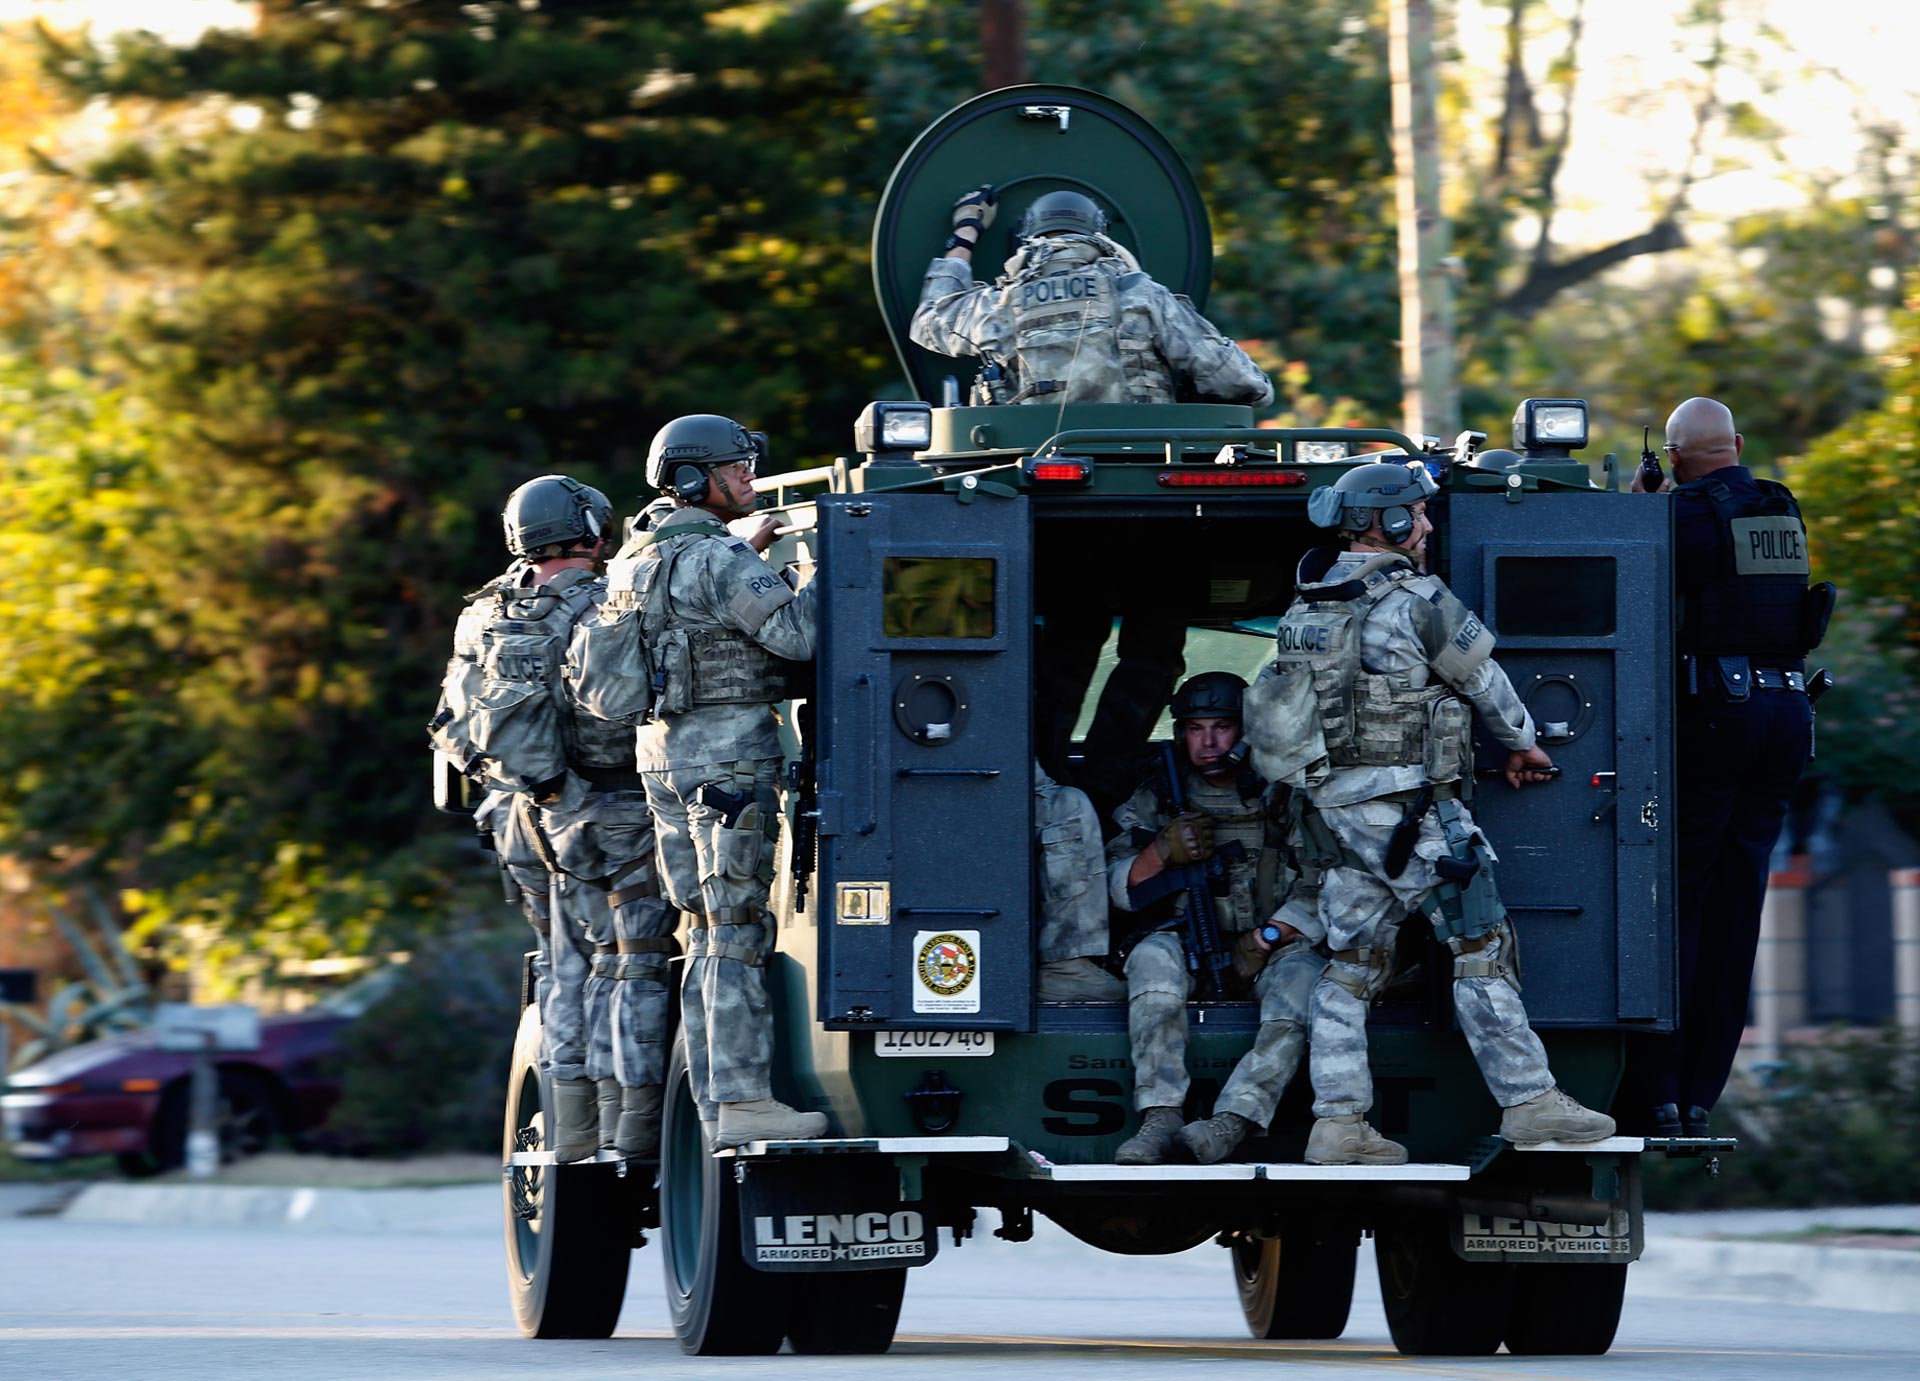 SWAT officers enter a neighborhood where suspects were believed to be after the mass shooting at San Bernardino's Inland Regional Center on Dec. 2, 2015.